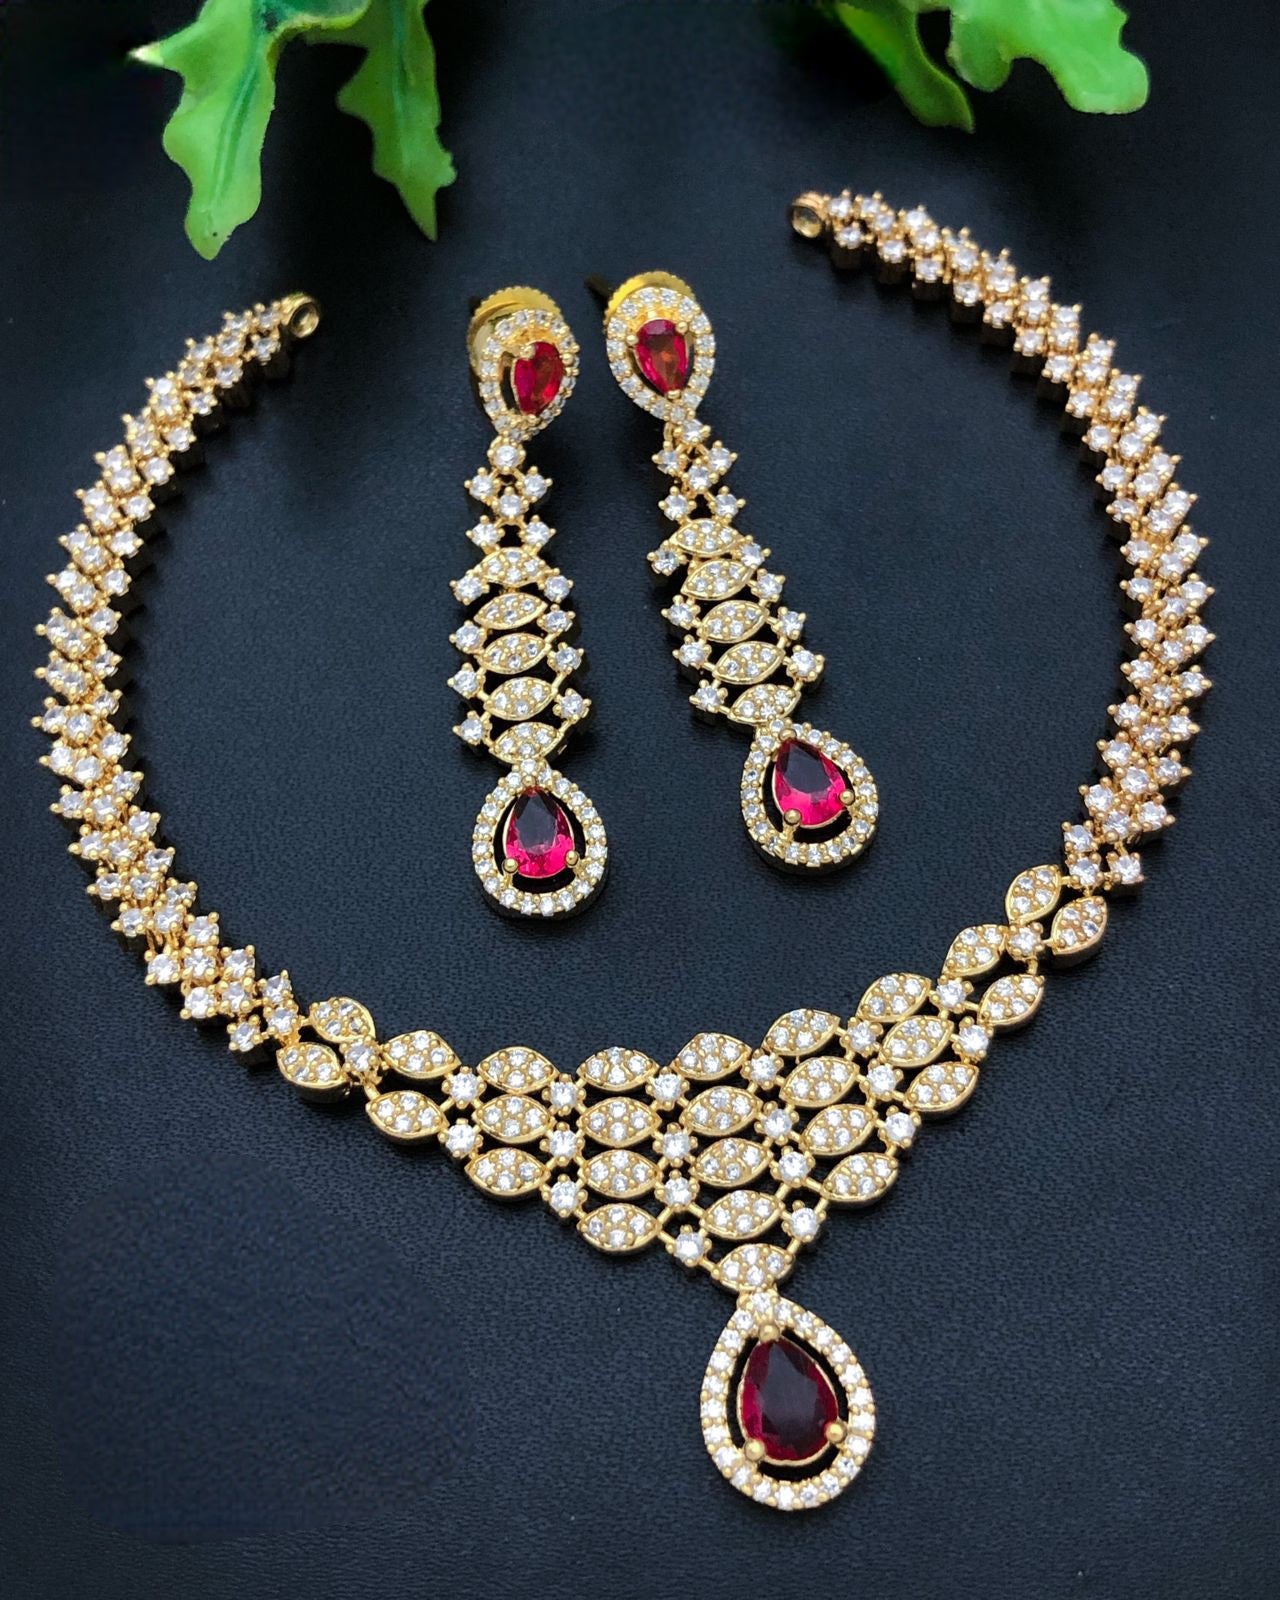 Gold Plated Cz American Diamond necklace Earring set | Indian Bollywood Jewelry | Trending Party necklace Earring set | Bridesmaid Gift